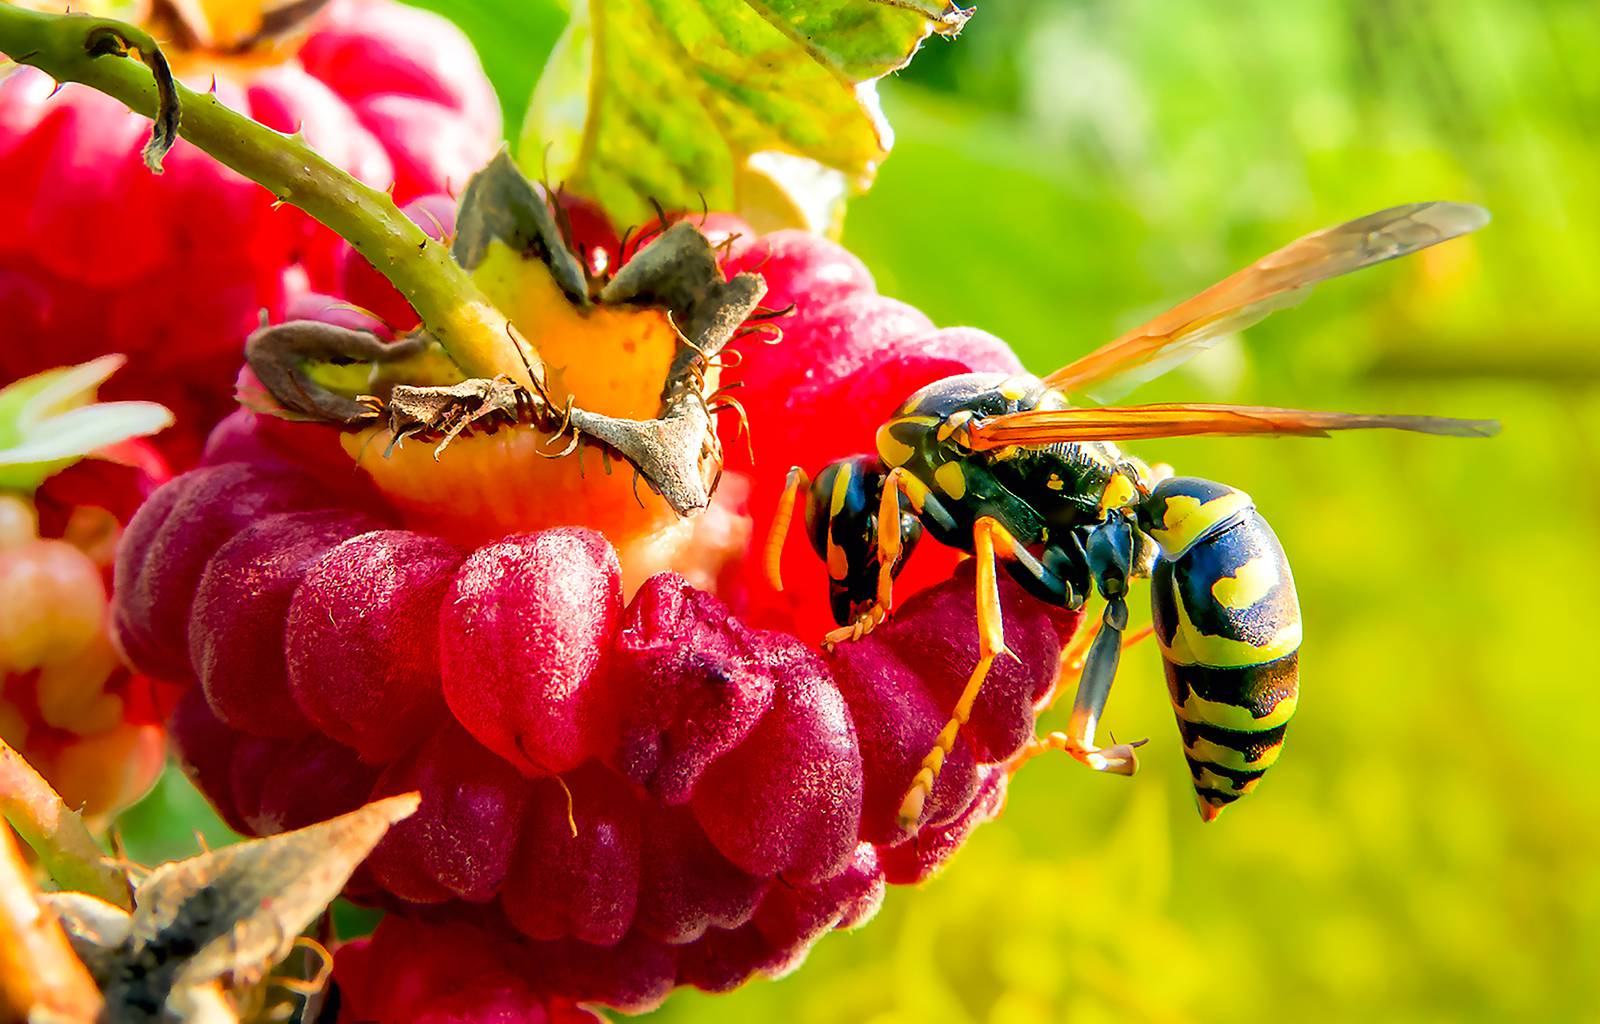 Are There Fewer Bees and More Wasps This Year?